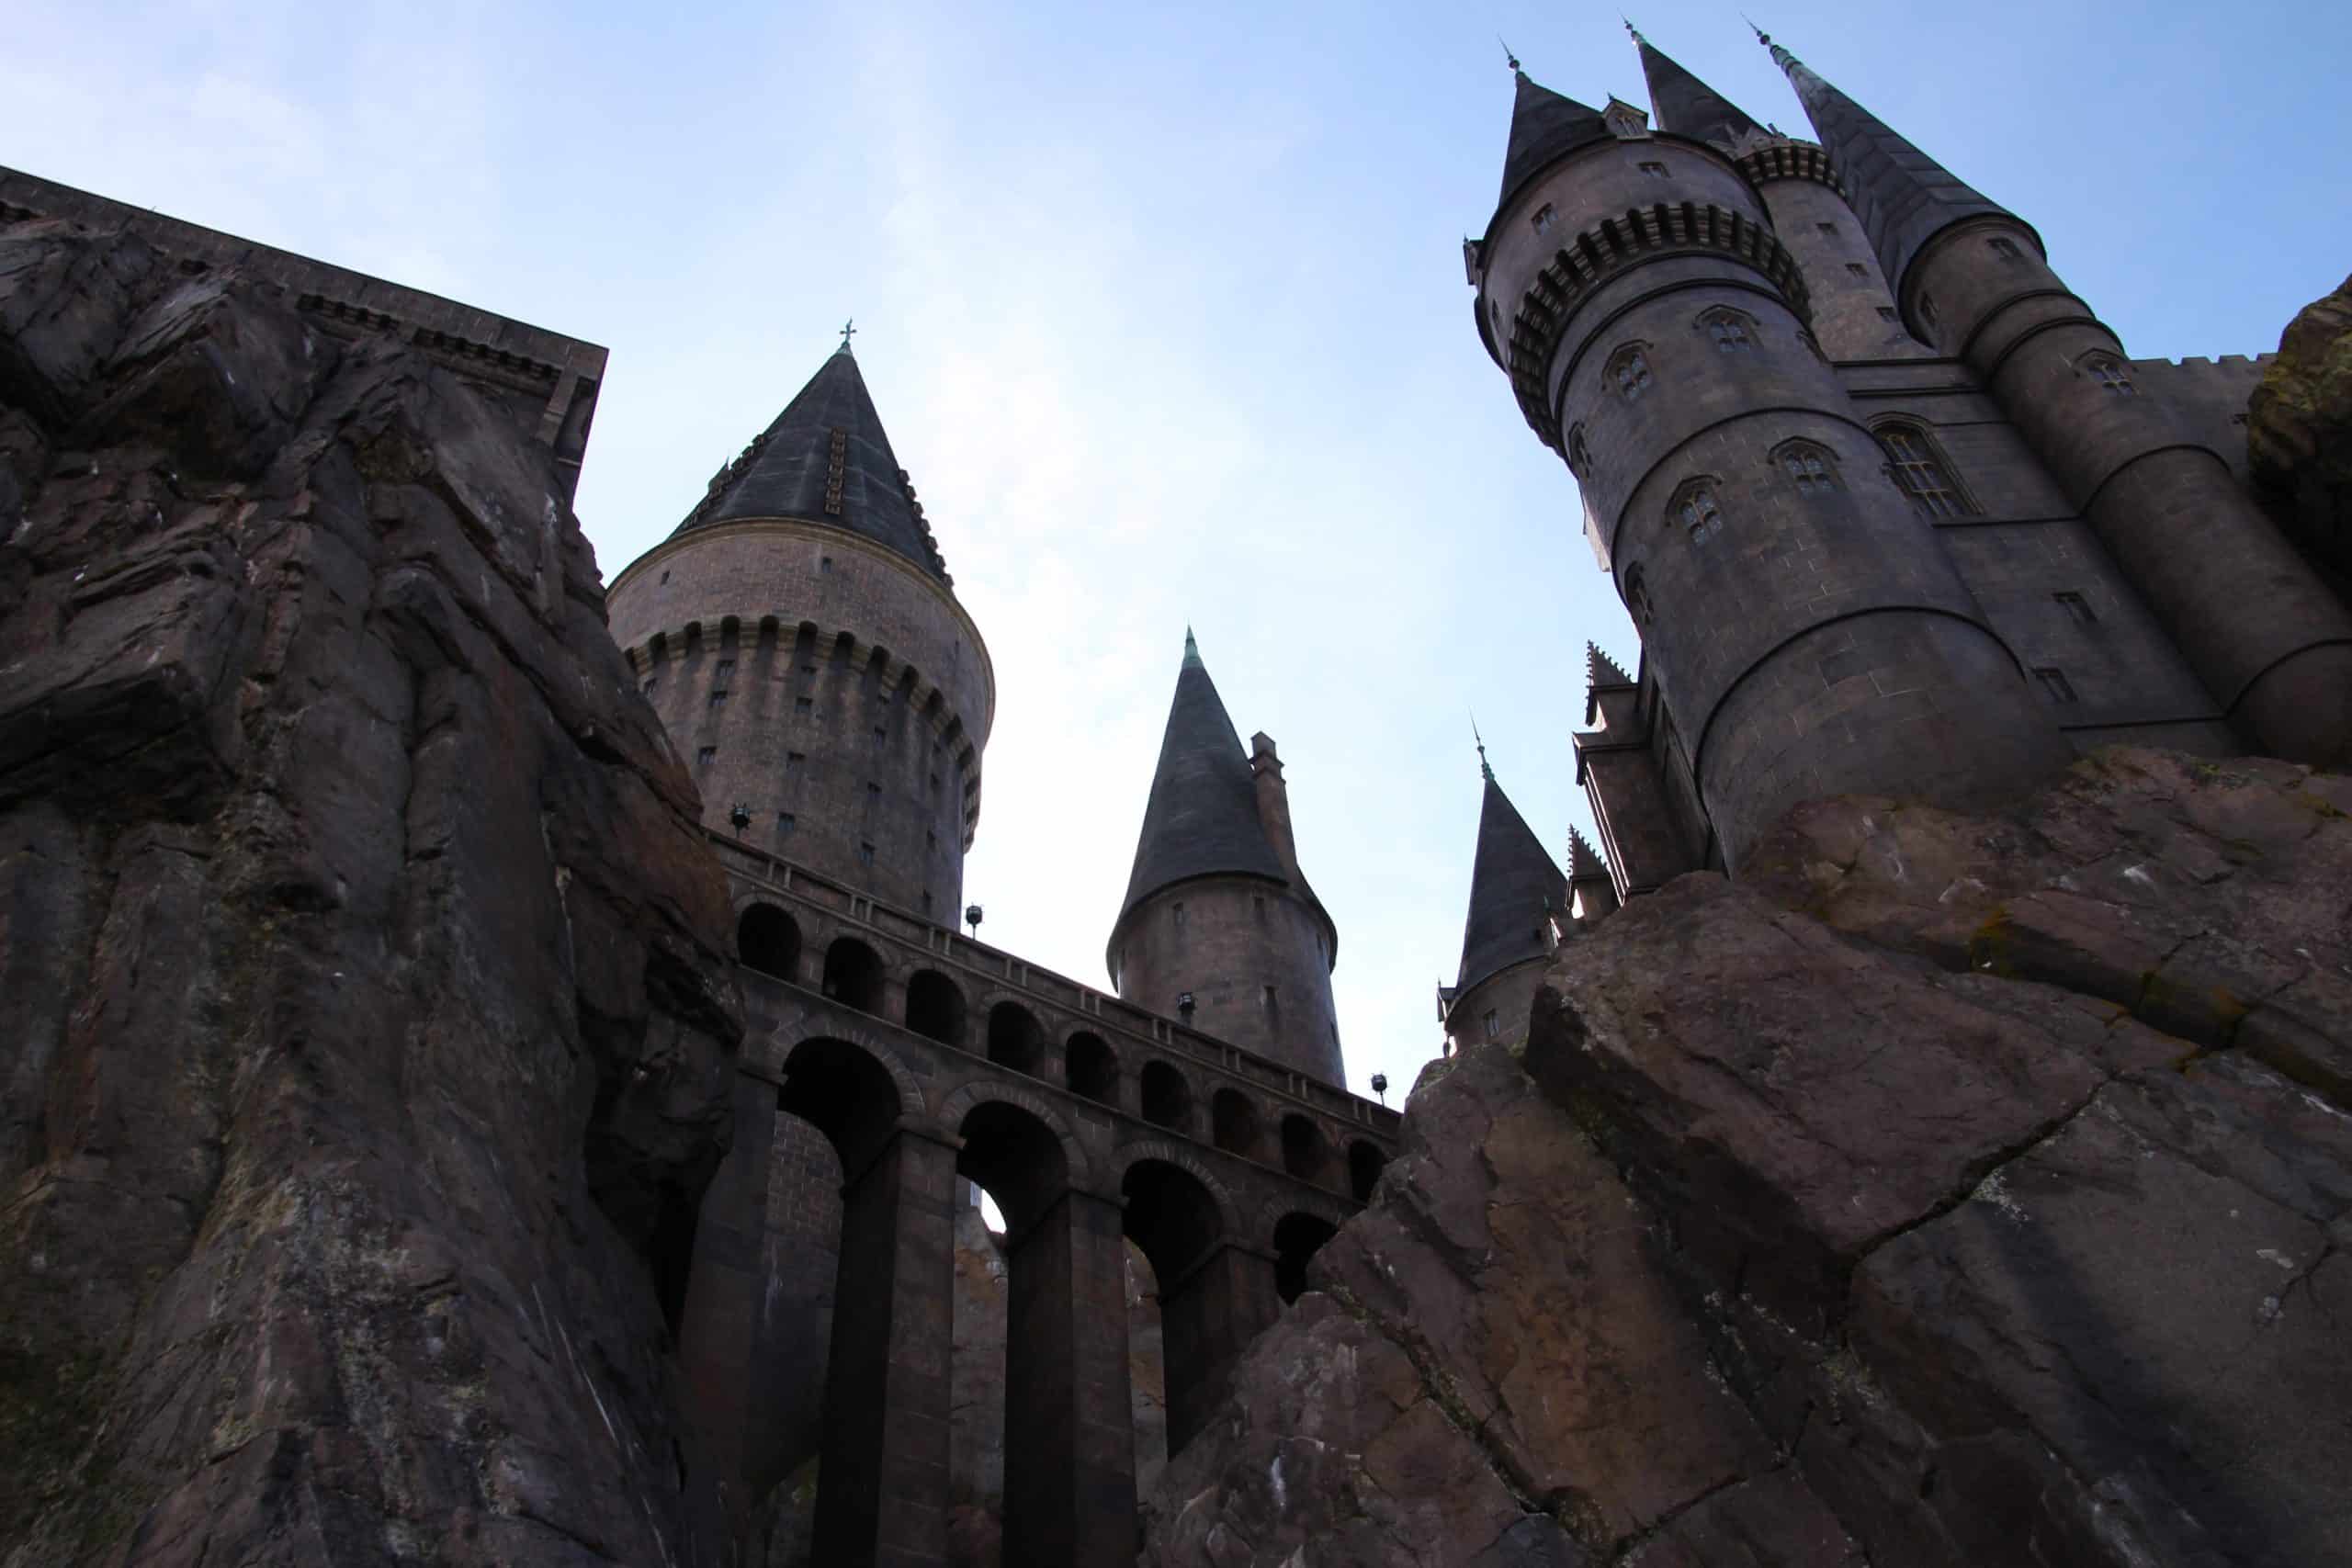 Harry Potter and the Forbidden Journey at Islands